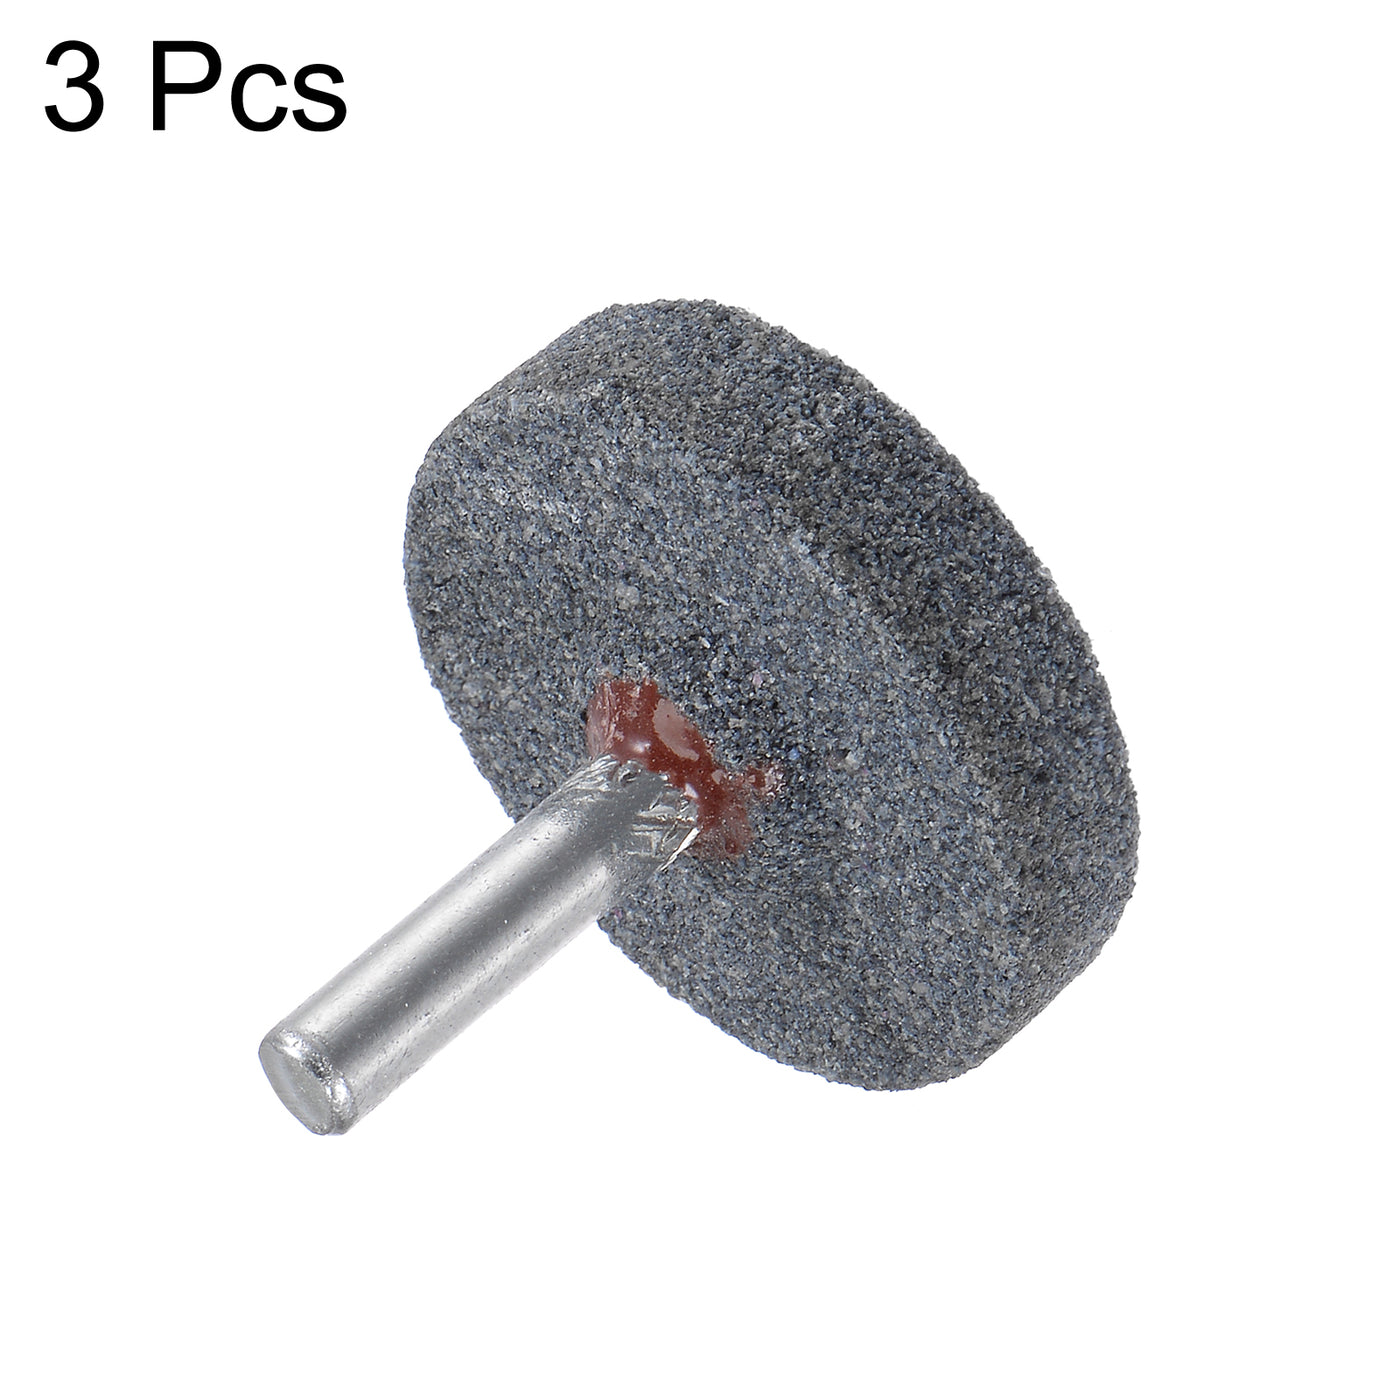 Uxcell Uxcell Mounted Grinding Stone 1/4" Shank 1.5-inch Dia Corundum Grinding Wheel